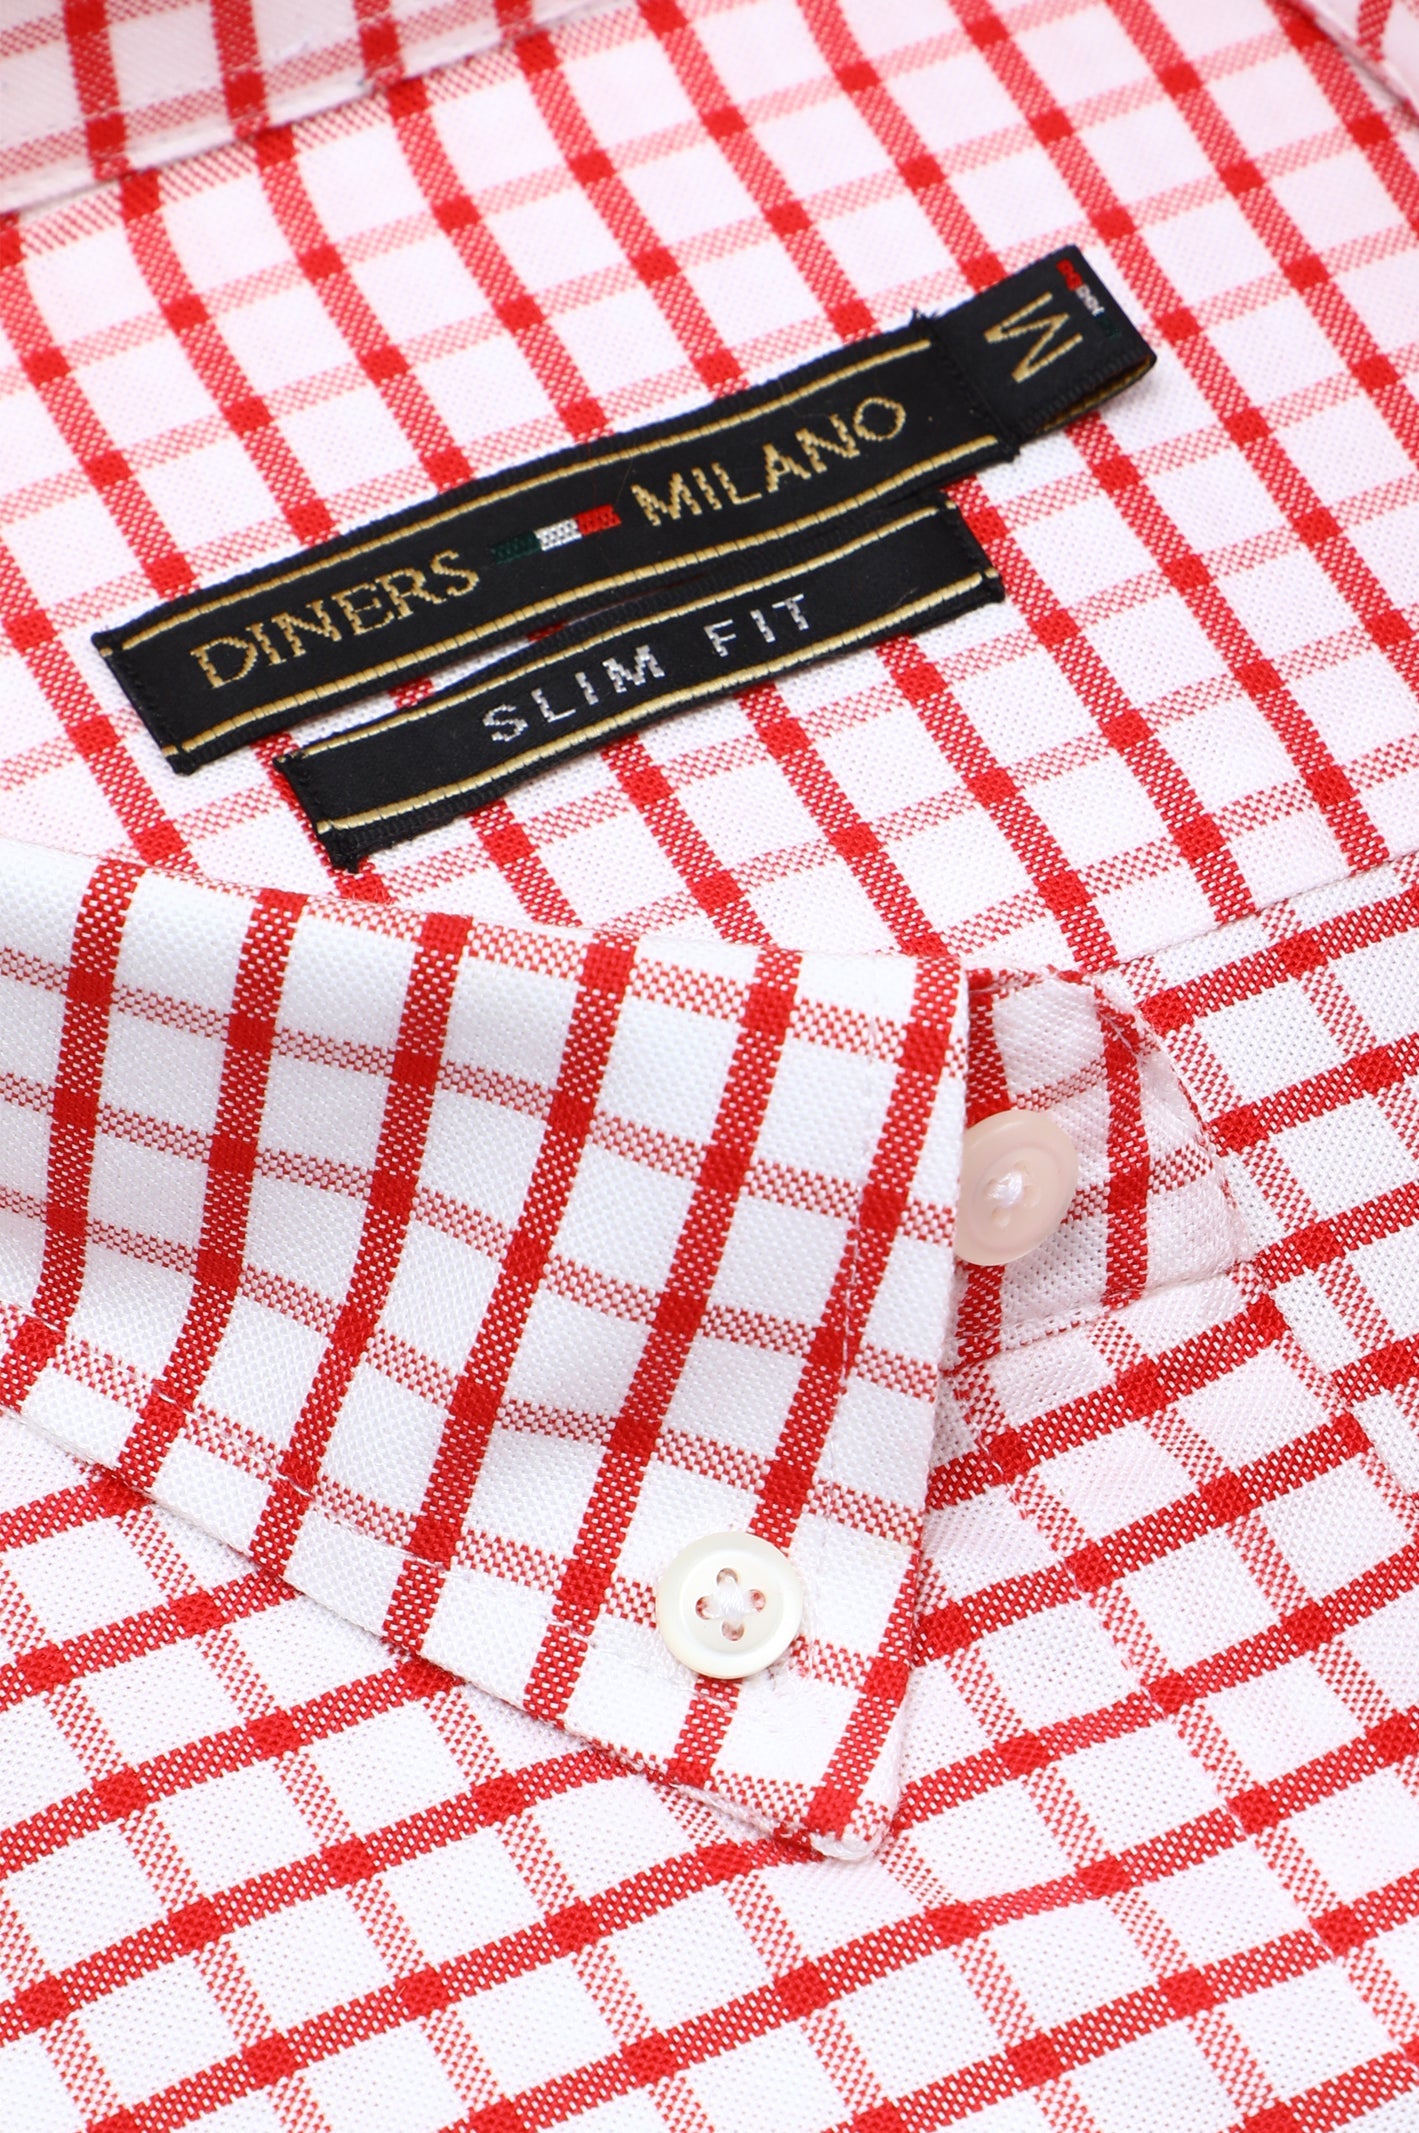 Casual Milano Shirt SKU: AM28369-RED - Diners